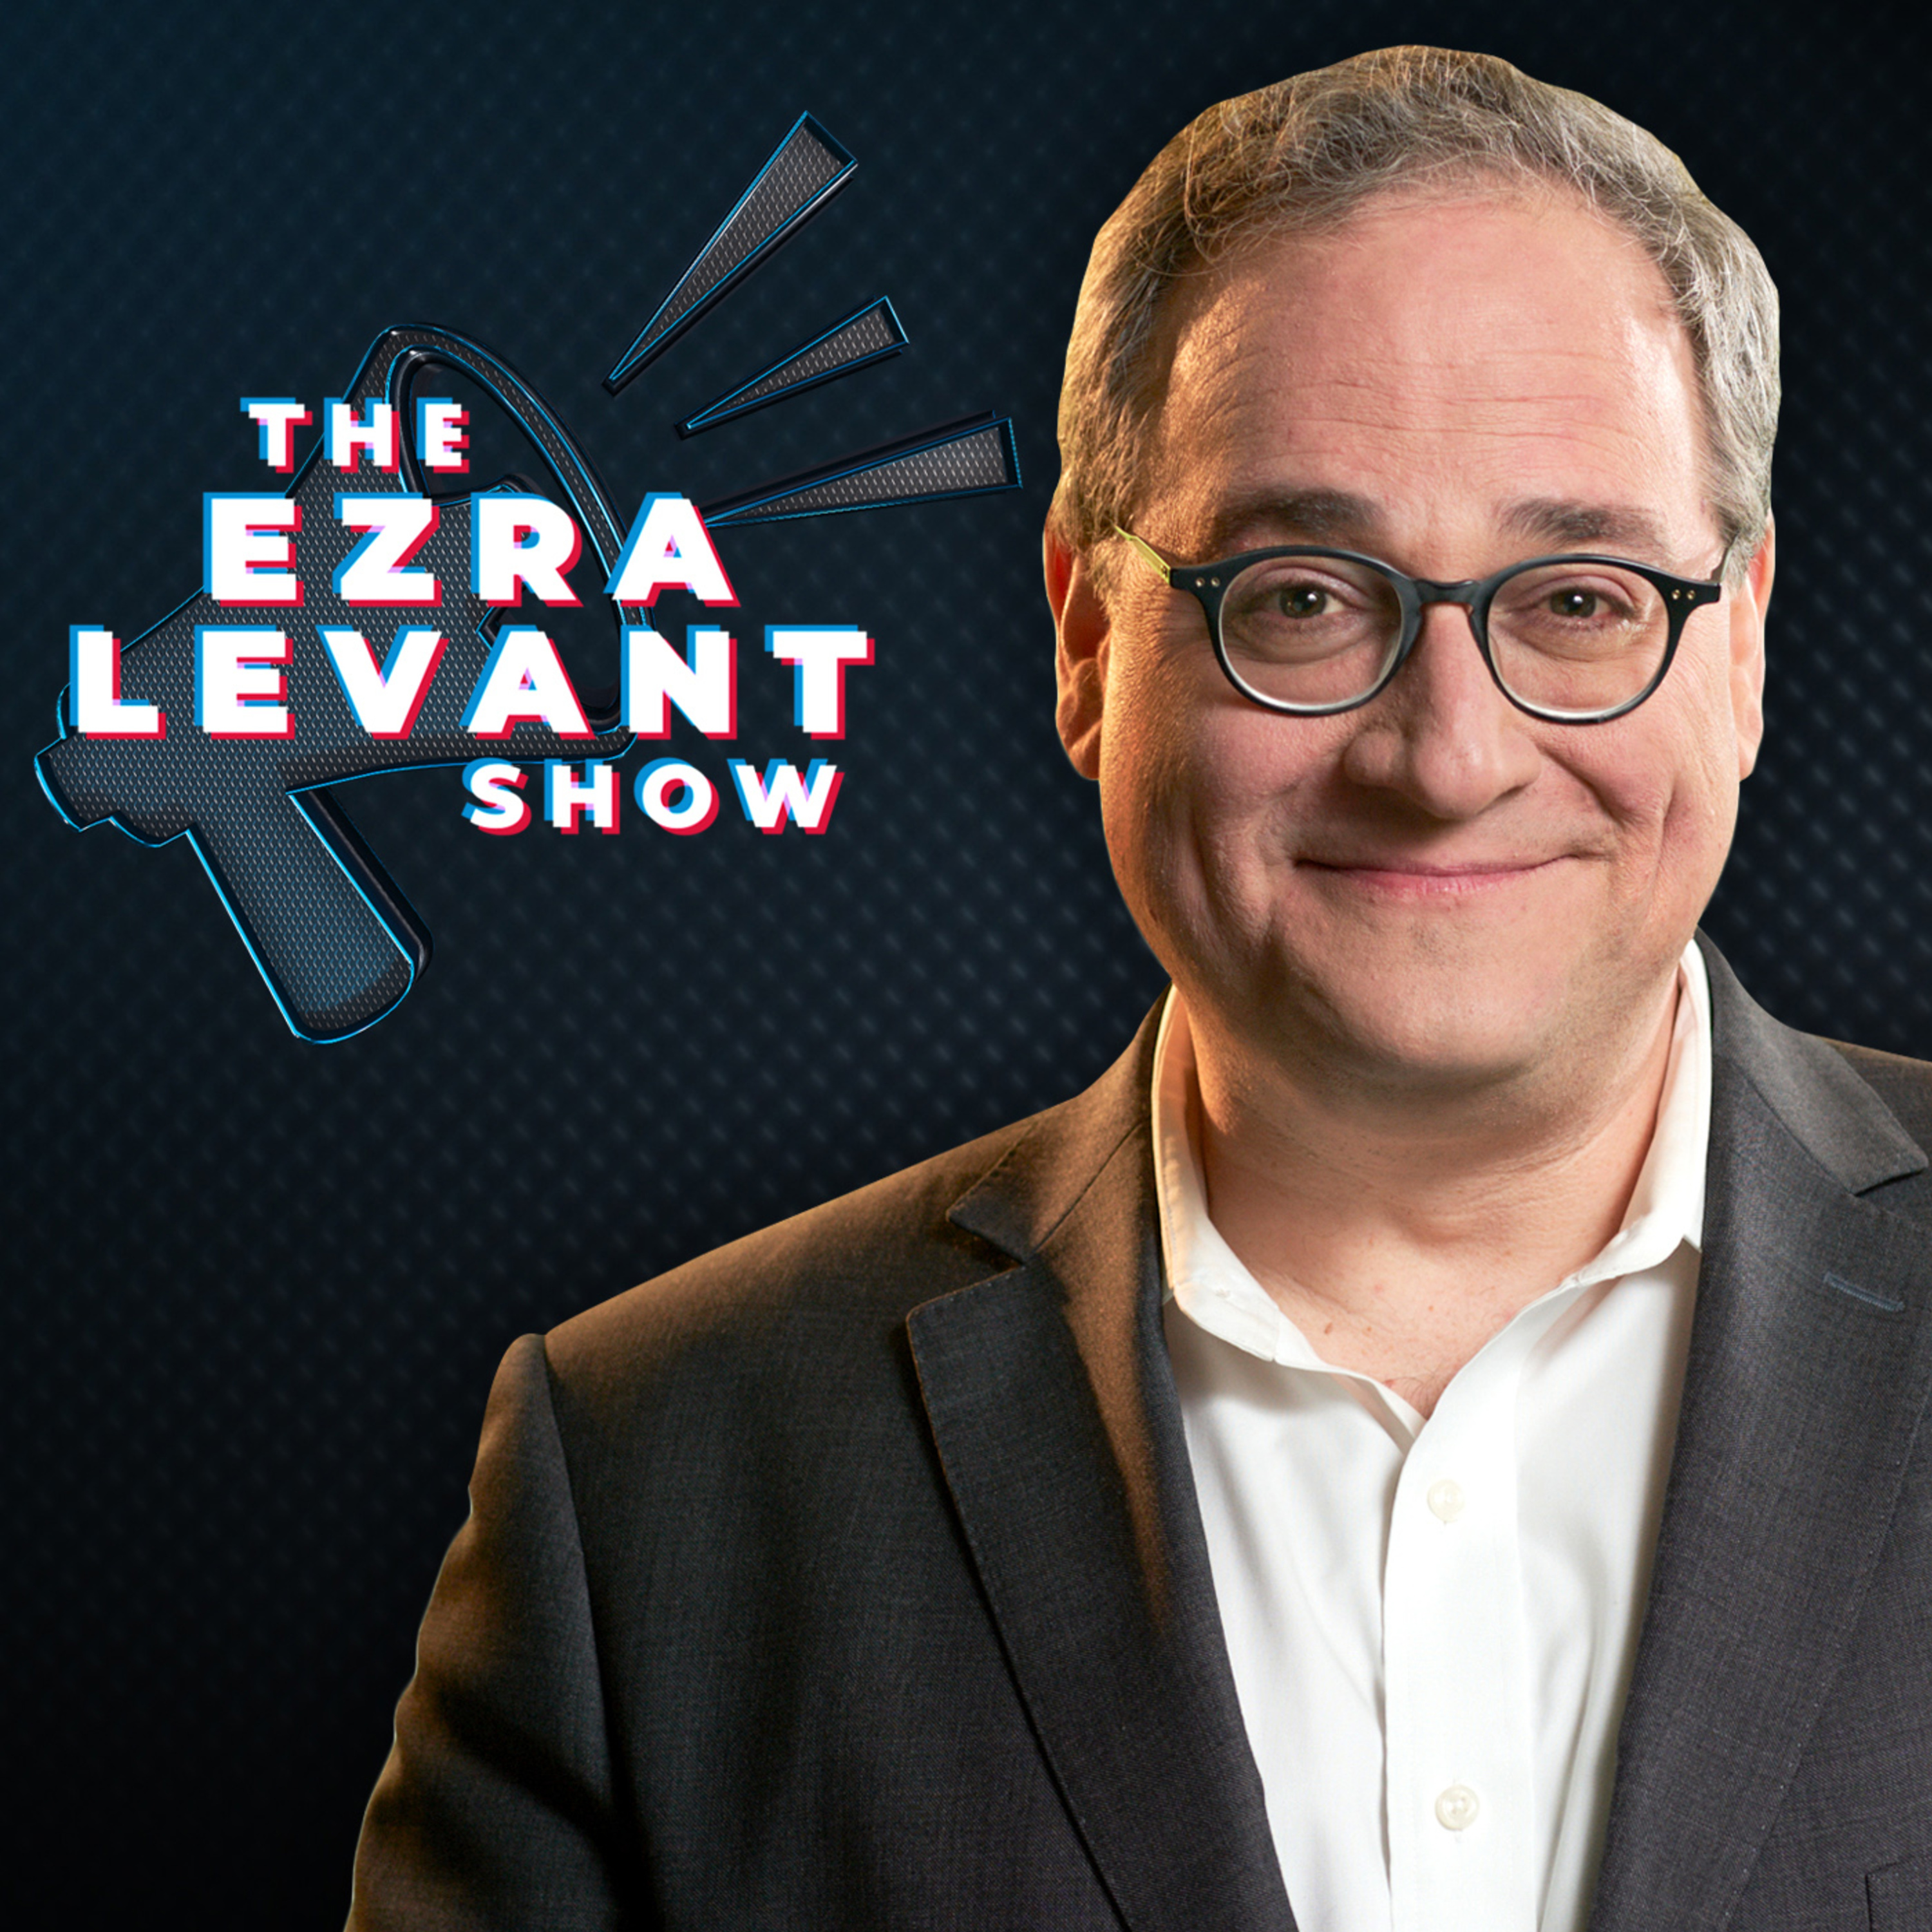 EZRA LEVANT: Joe Biden is the only world leader who makes Justin Trudeau look smart